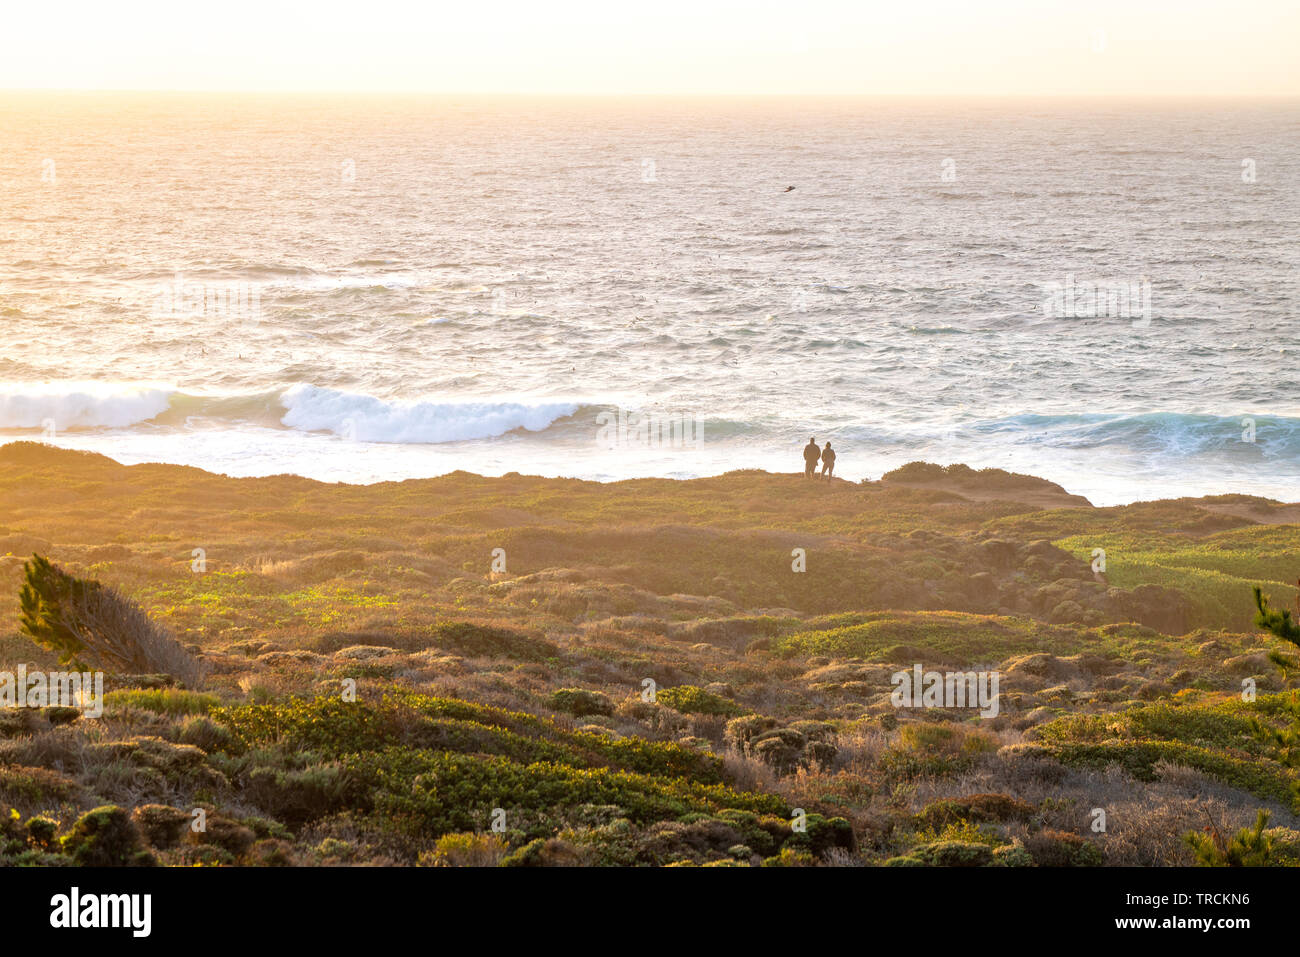 Happy couple enjoying the sunset with an amazing Pacific Ocean view of Big Sur, California coastline from a cliff. Stock Photo